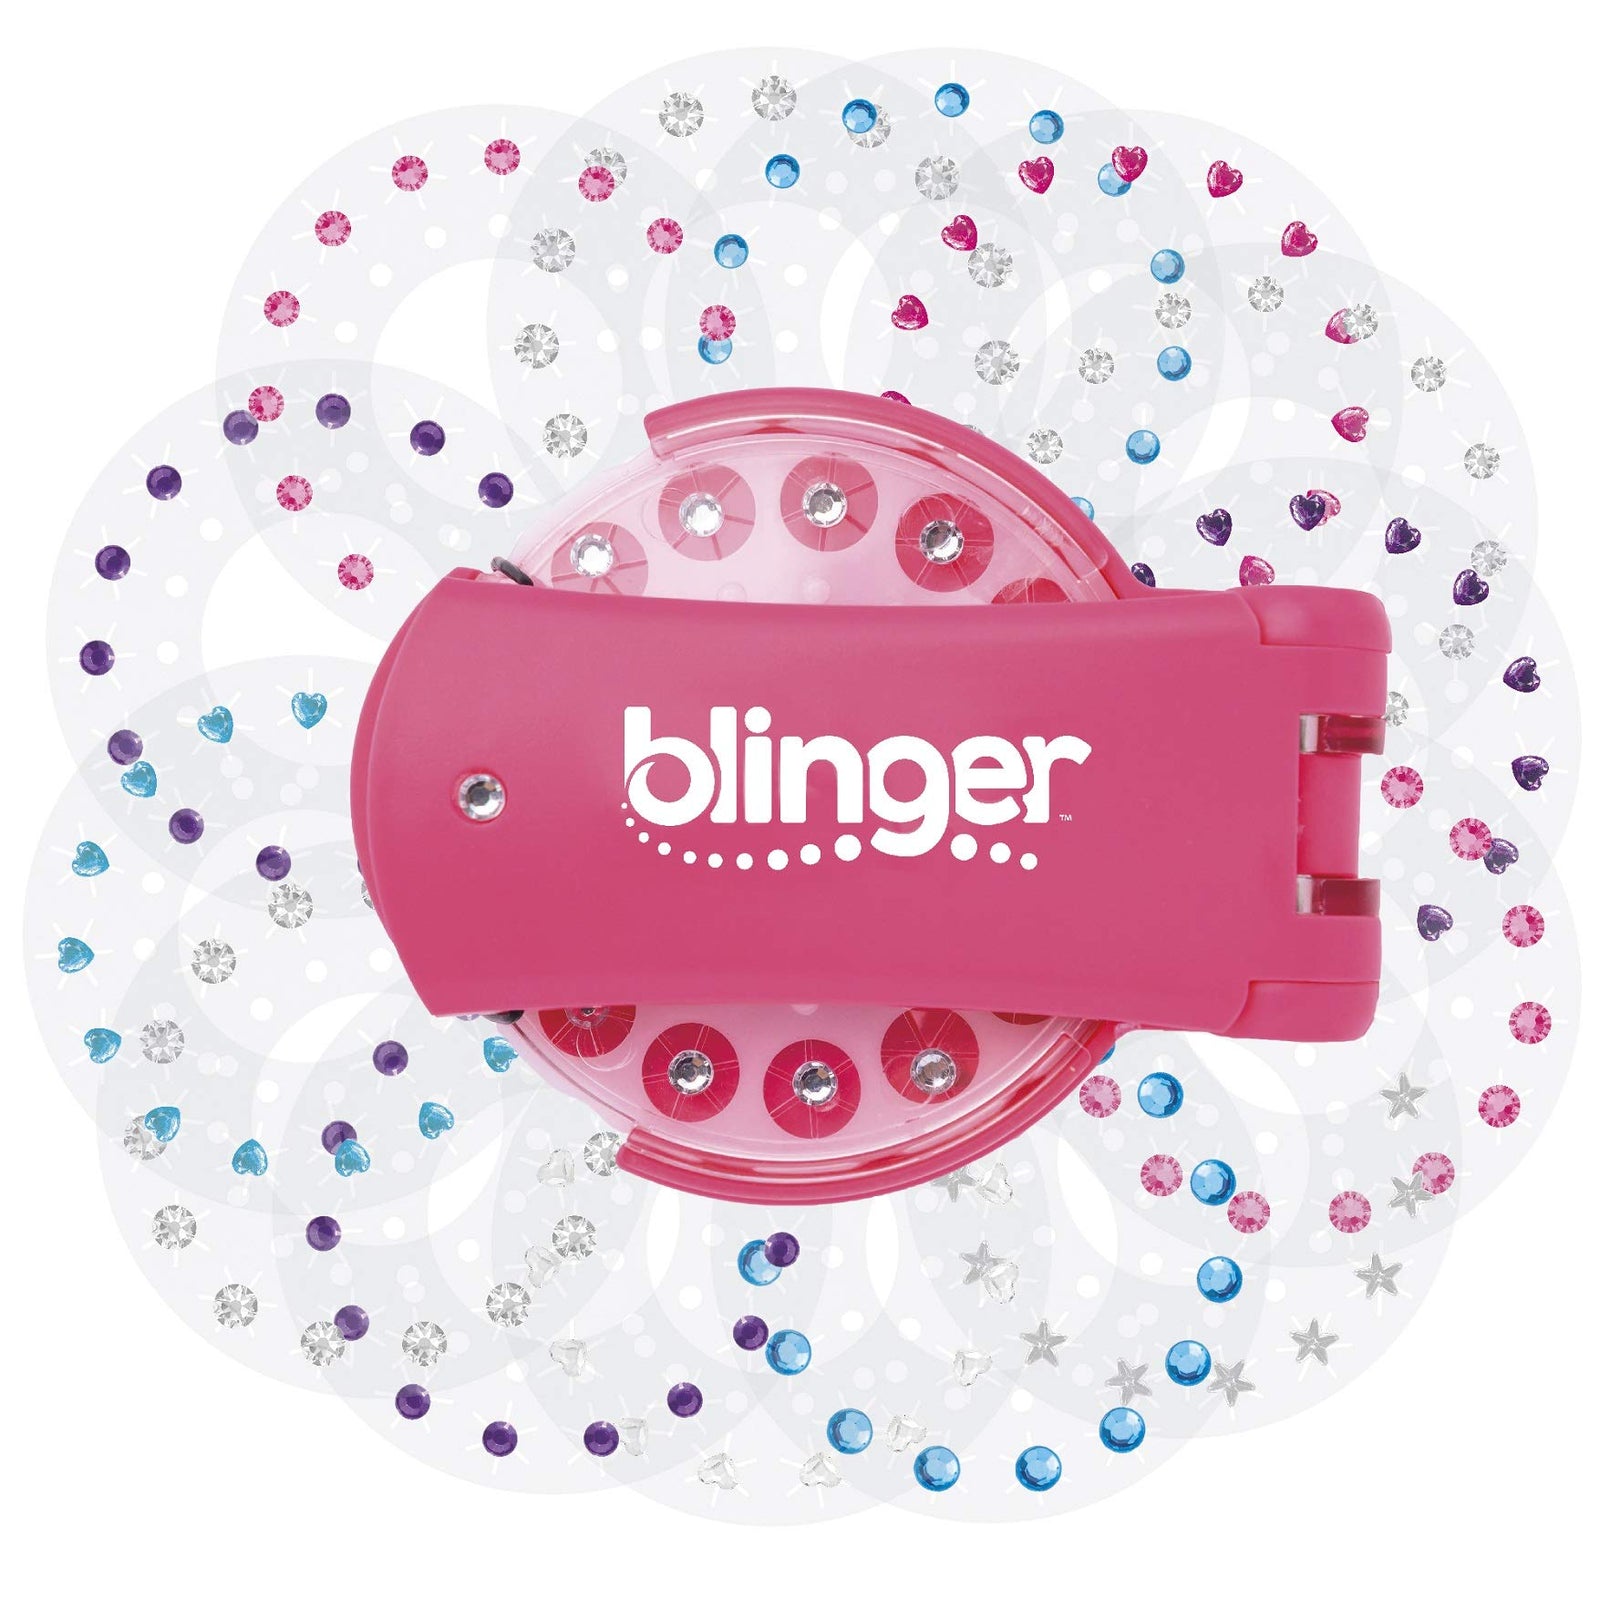 Blinger Ultimate Set, Glam Collection, Comes with Glam Styling Tool & 225 Gems - Load, Click, Bling! Hair, Fashion, Anything! (Amazon Exclusive), Pink